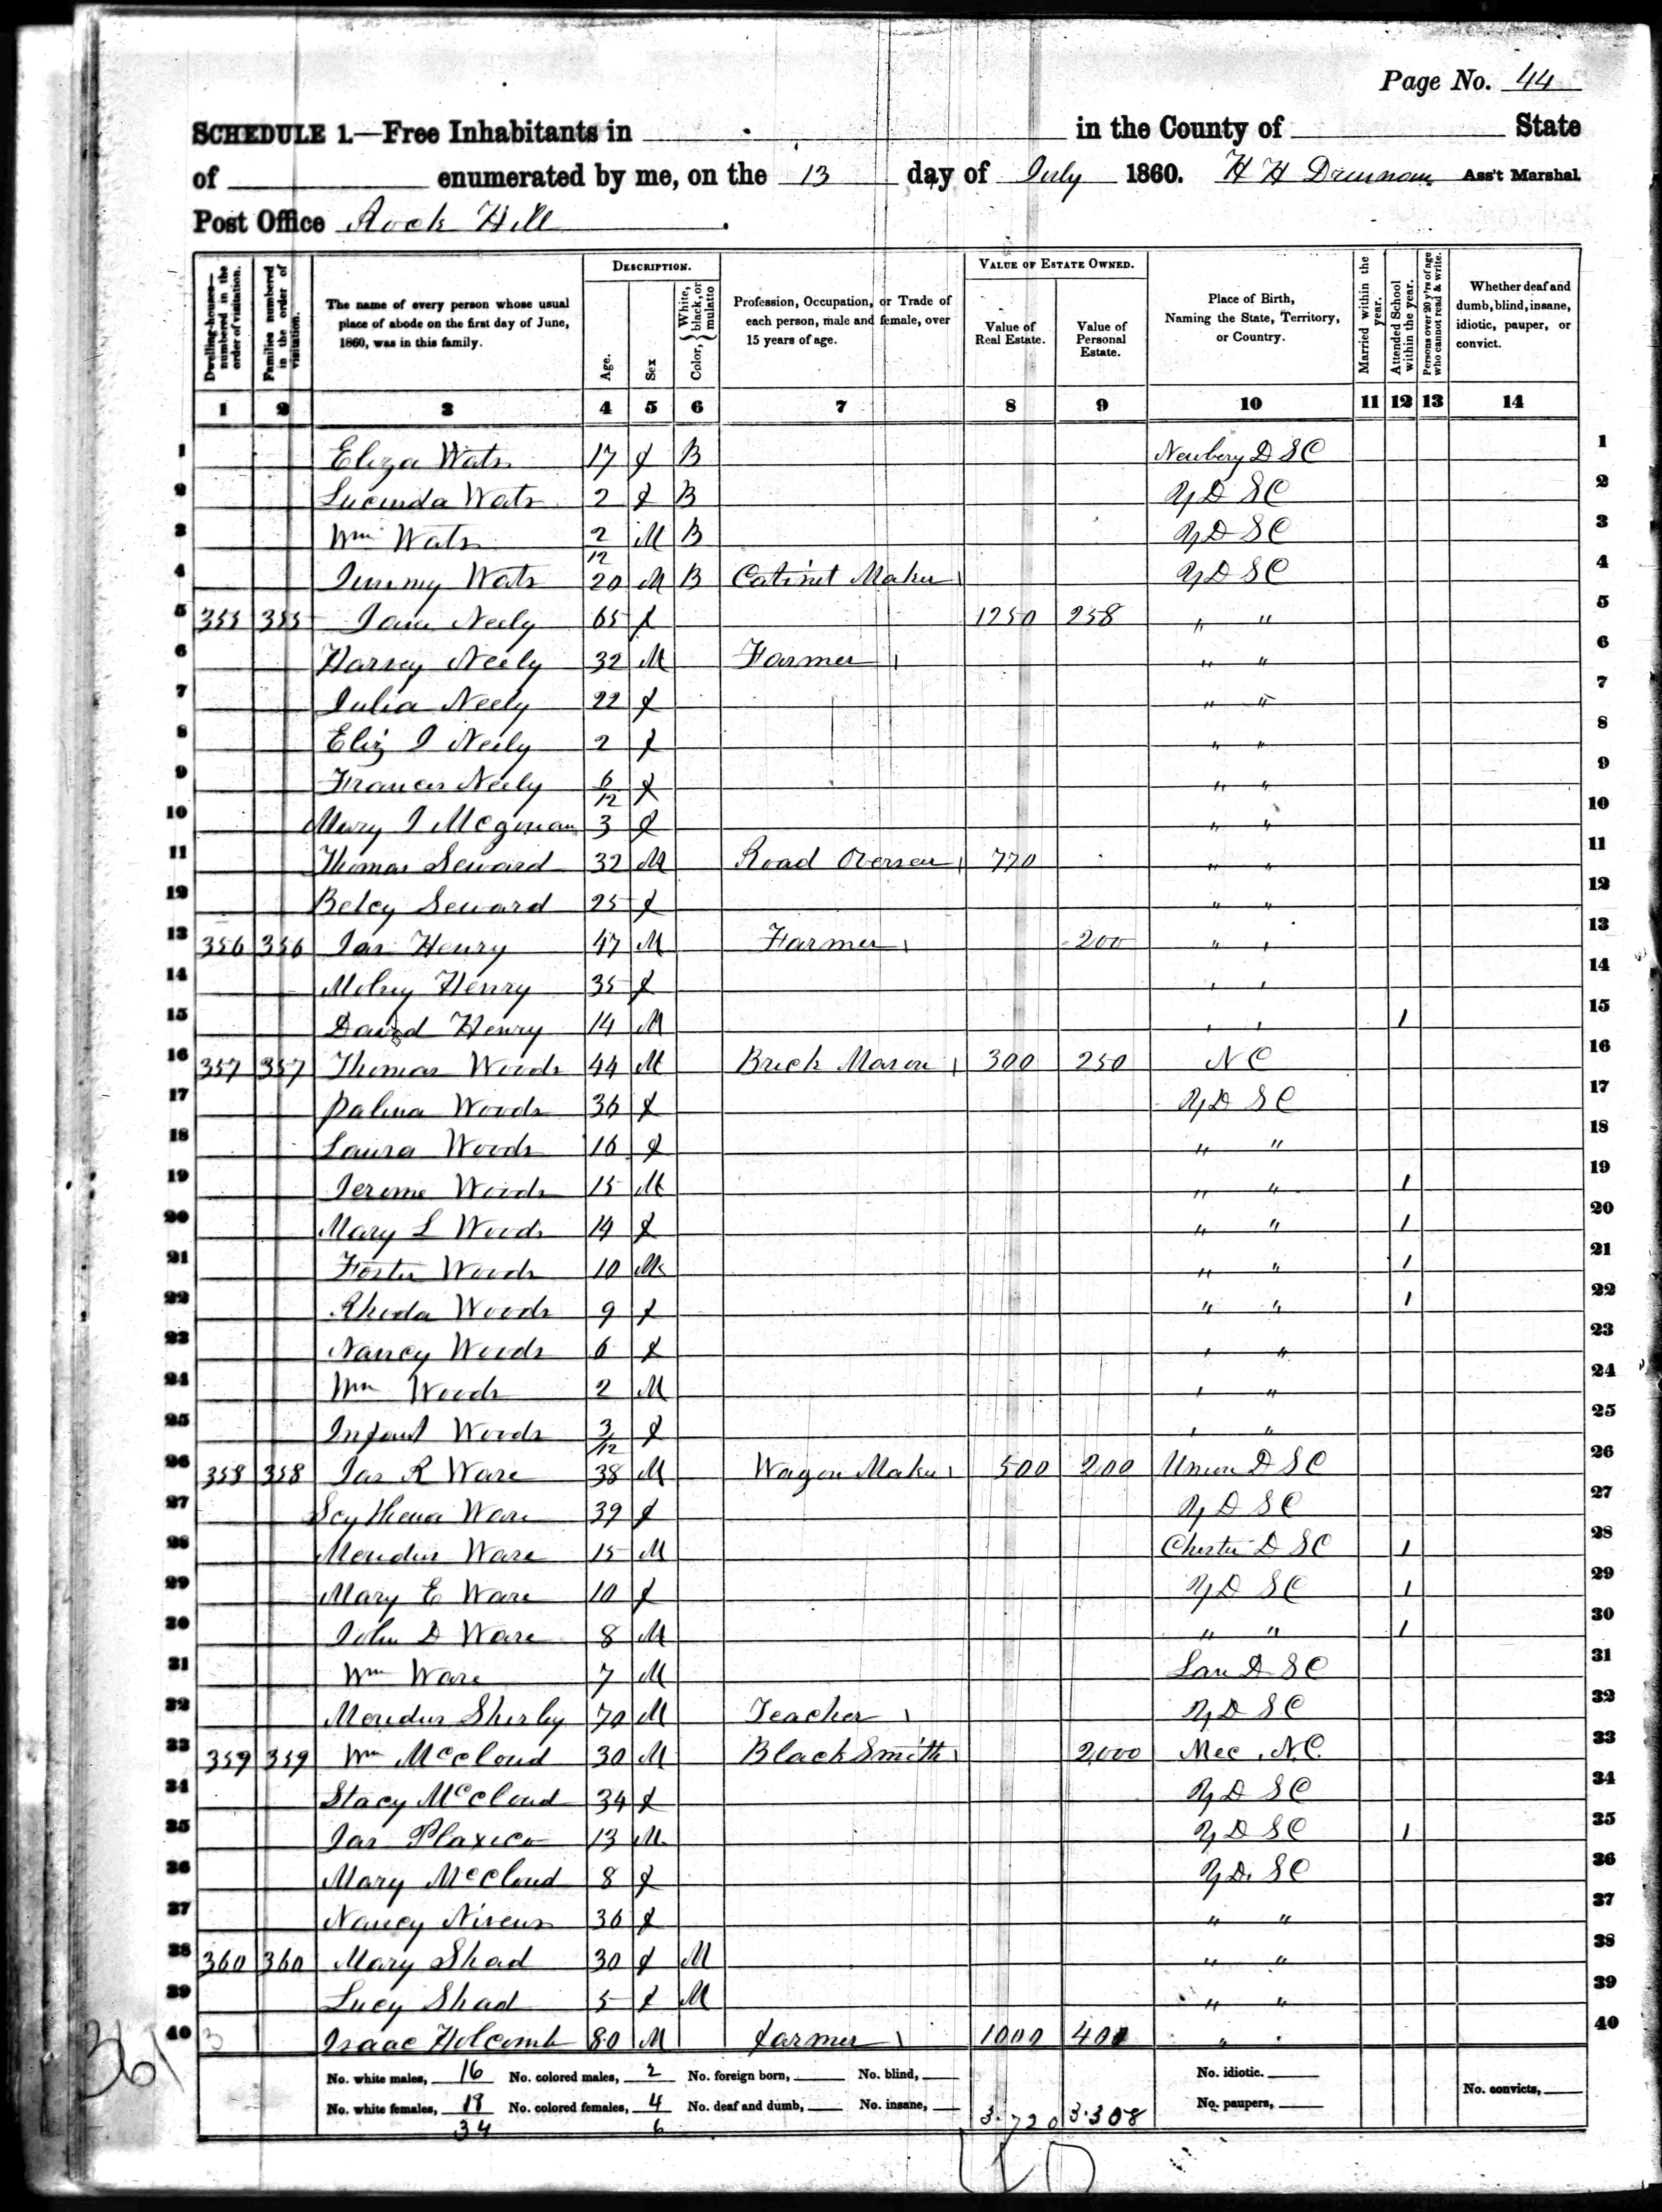 1860 Federal Census - P.2 (Geo. and Jimmy Watts)